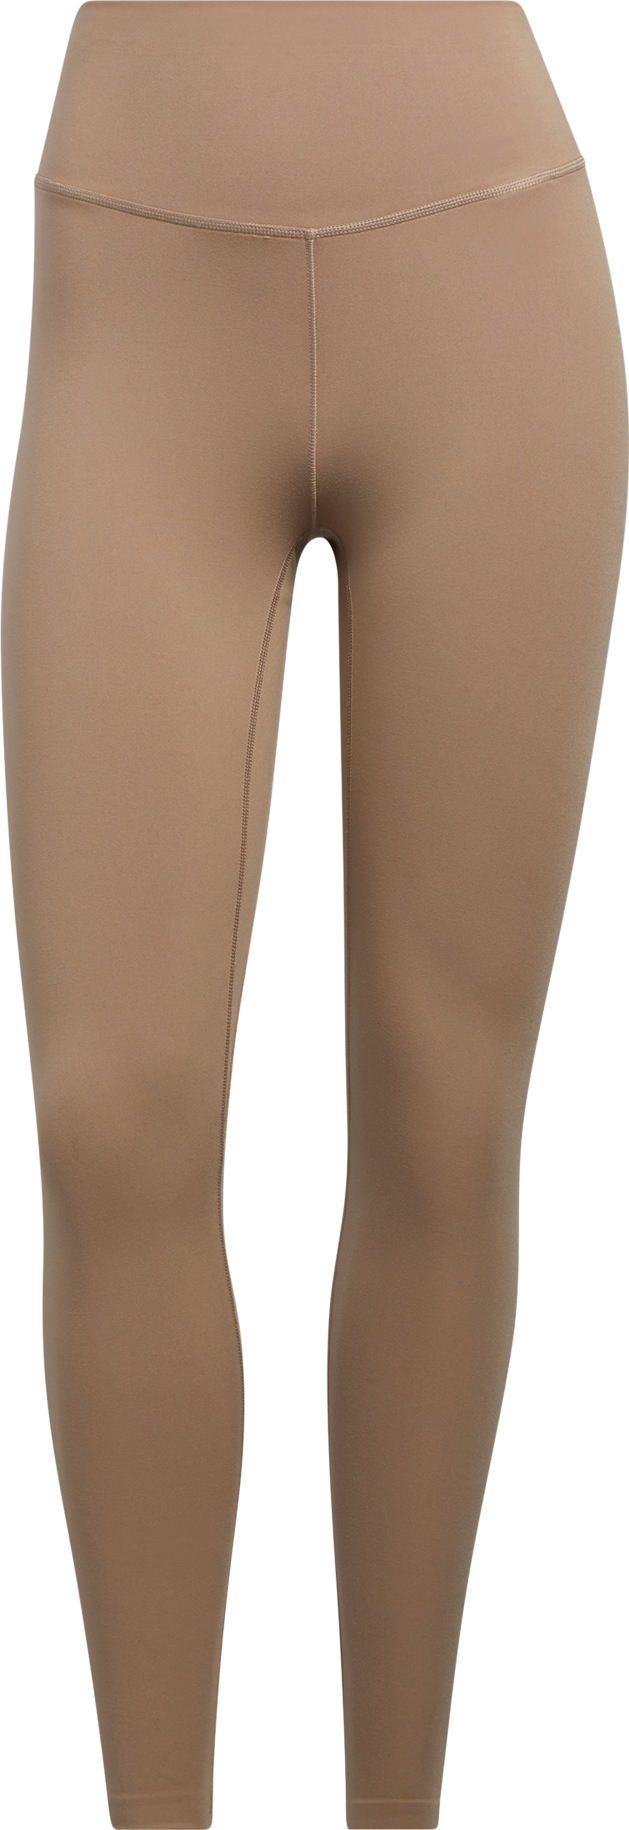 Women’s Yoga Luxe Studio 7/8 Tight Chalky Brown